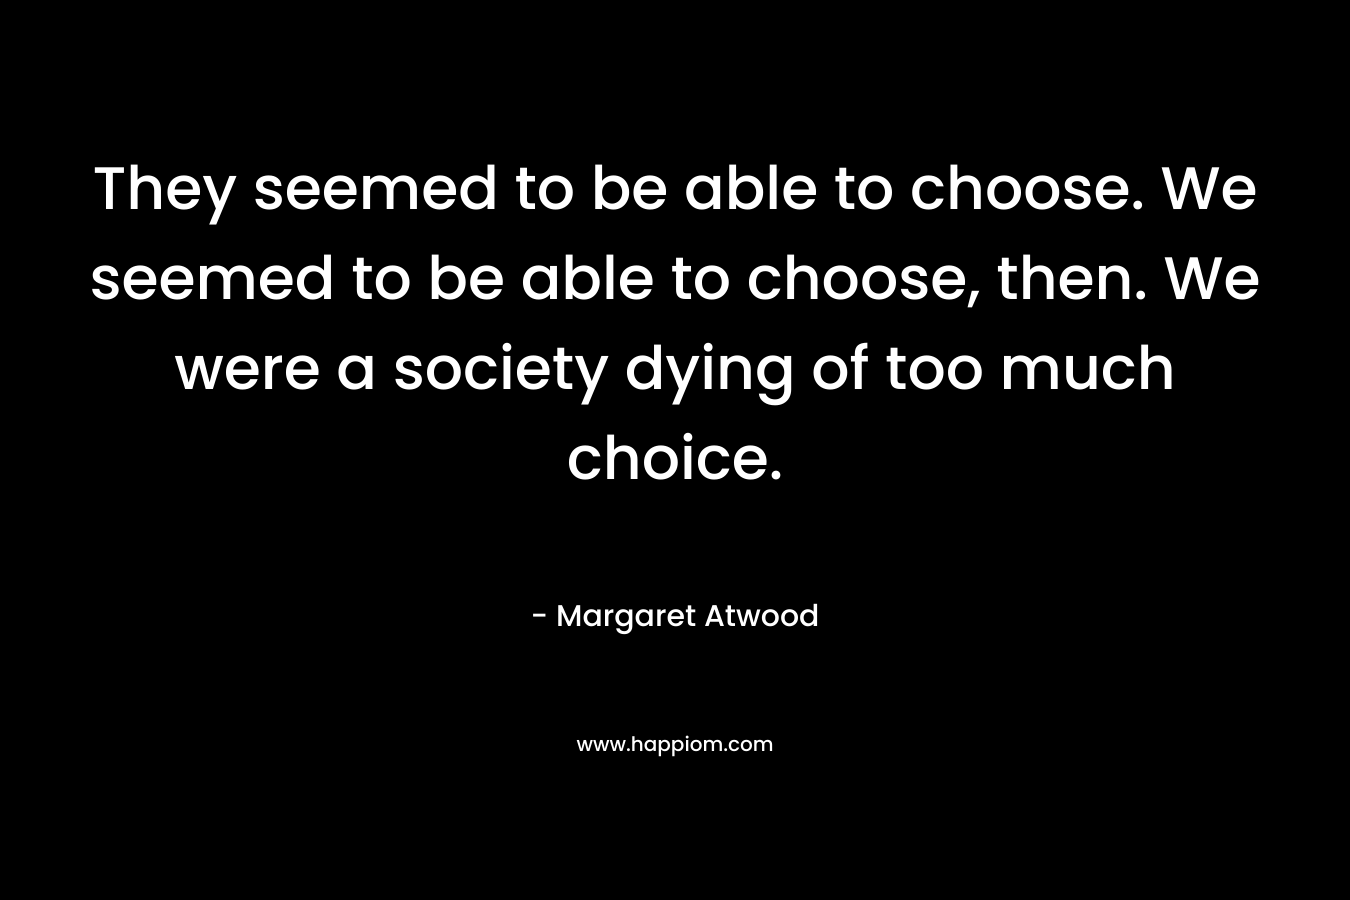 They seemed to be able to choose. We seemed to be able to choose, then. We were a society dying of too much choice.